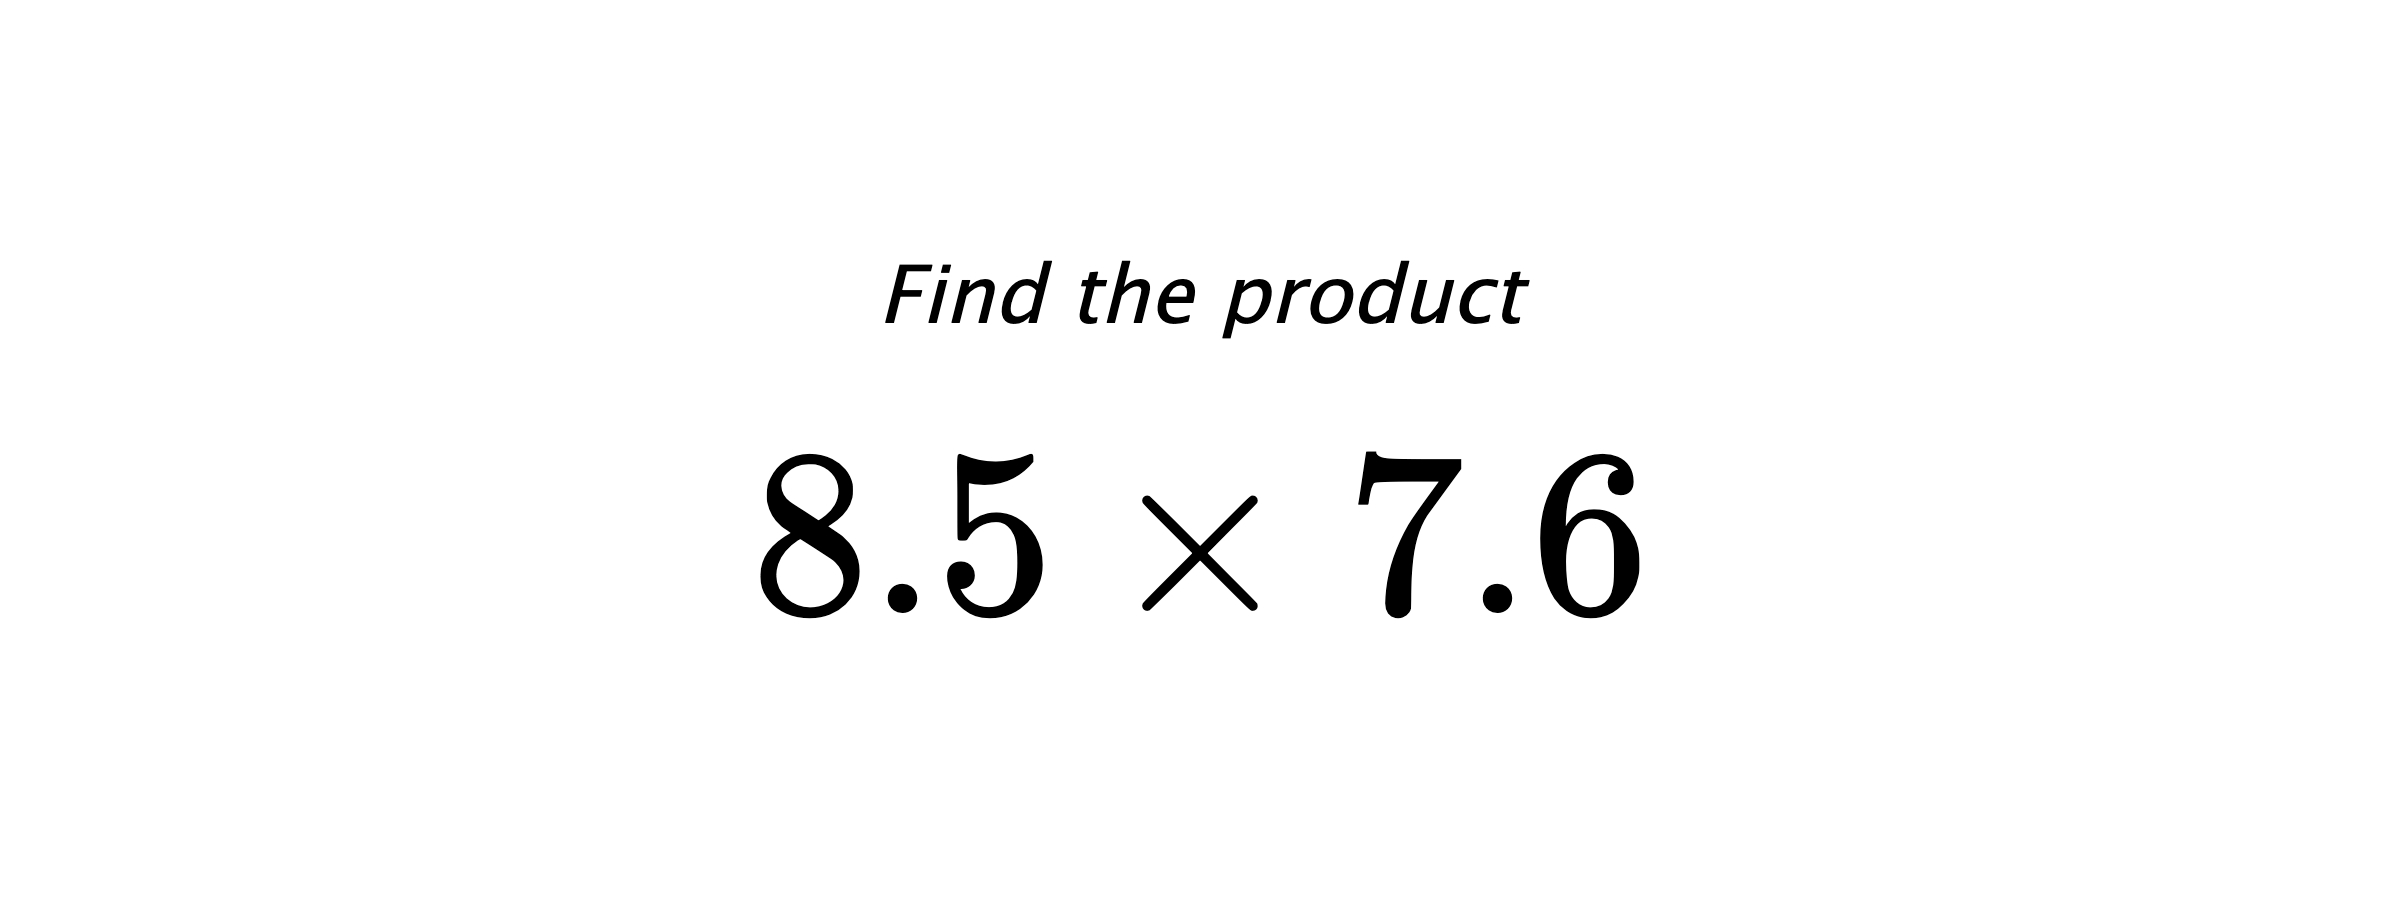 Find the product $ 8.5 \times 7.6 $